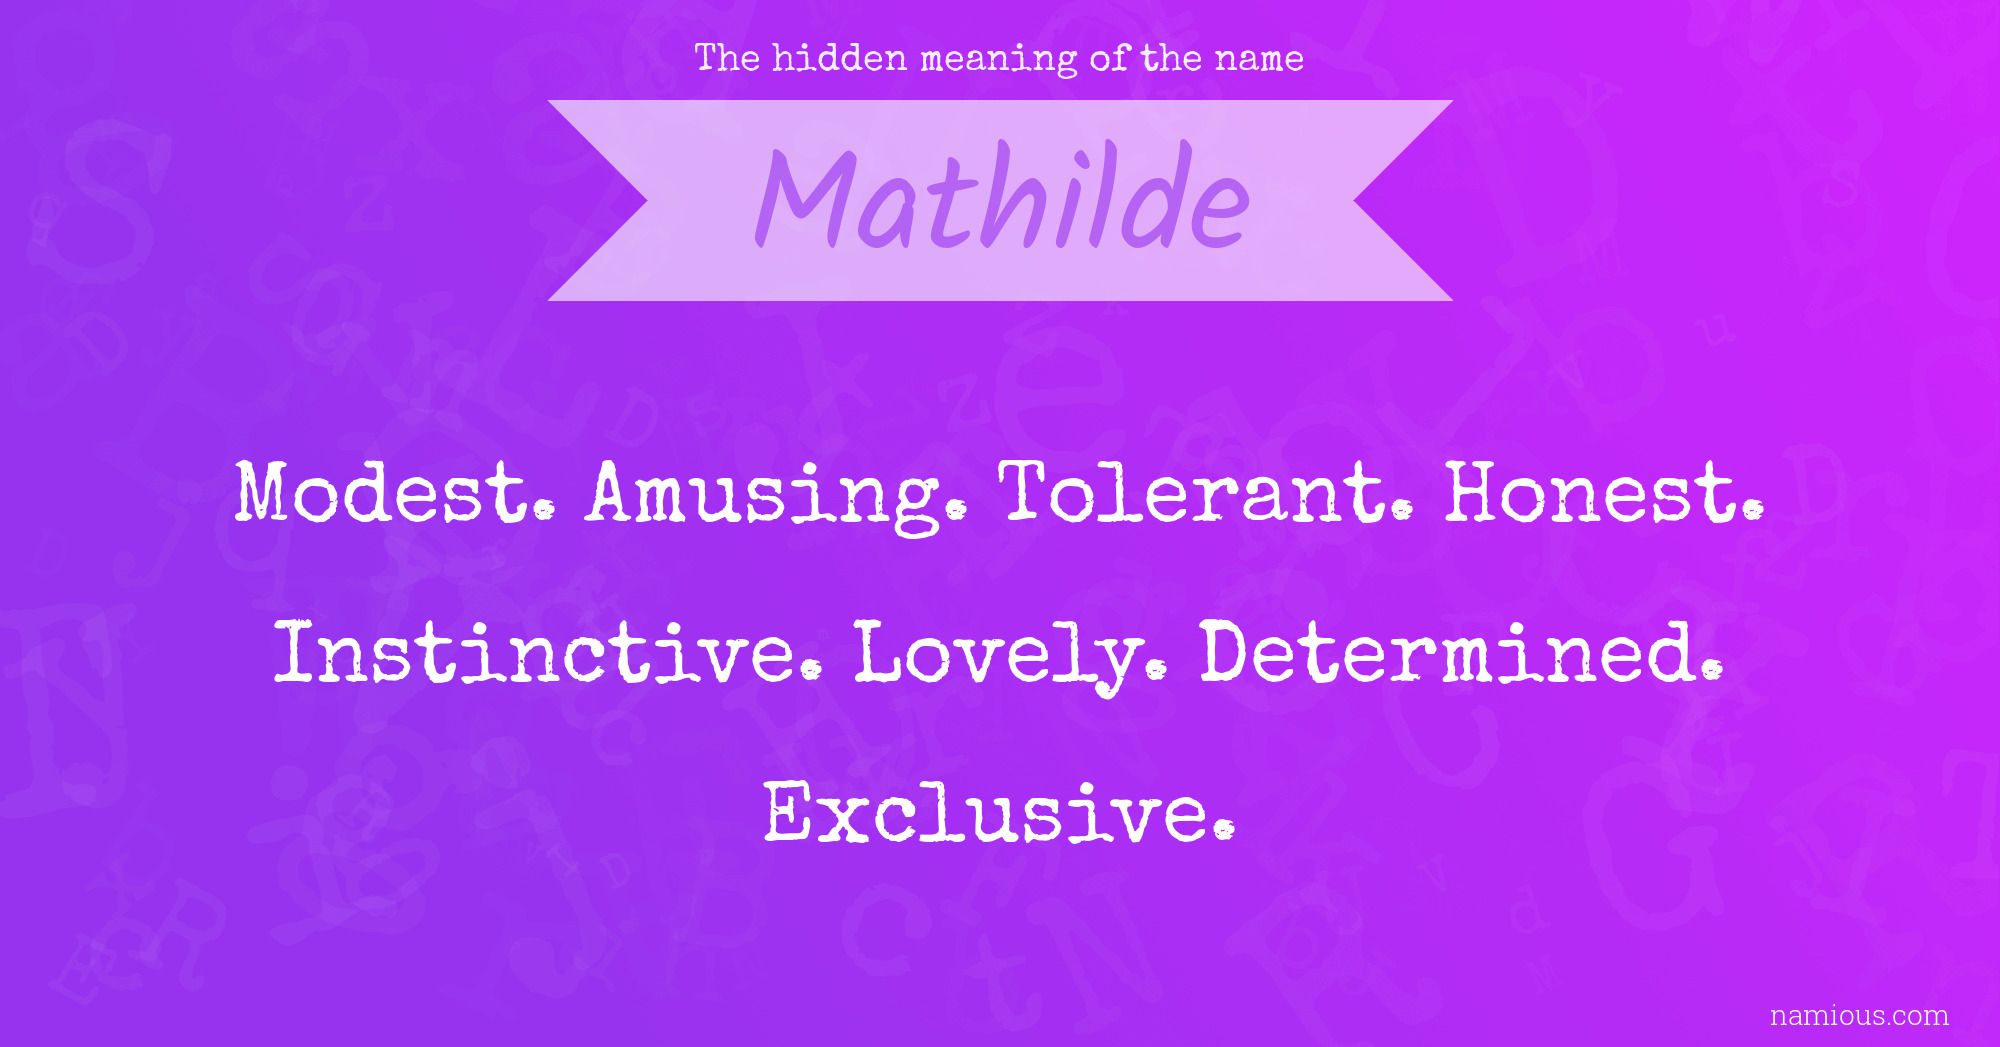 The hidden meaning of the name Mathilde